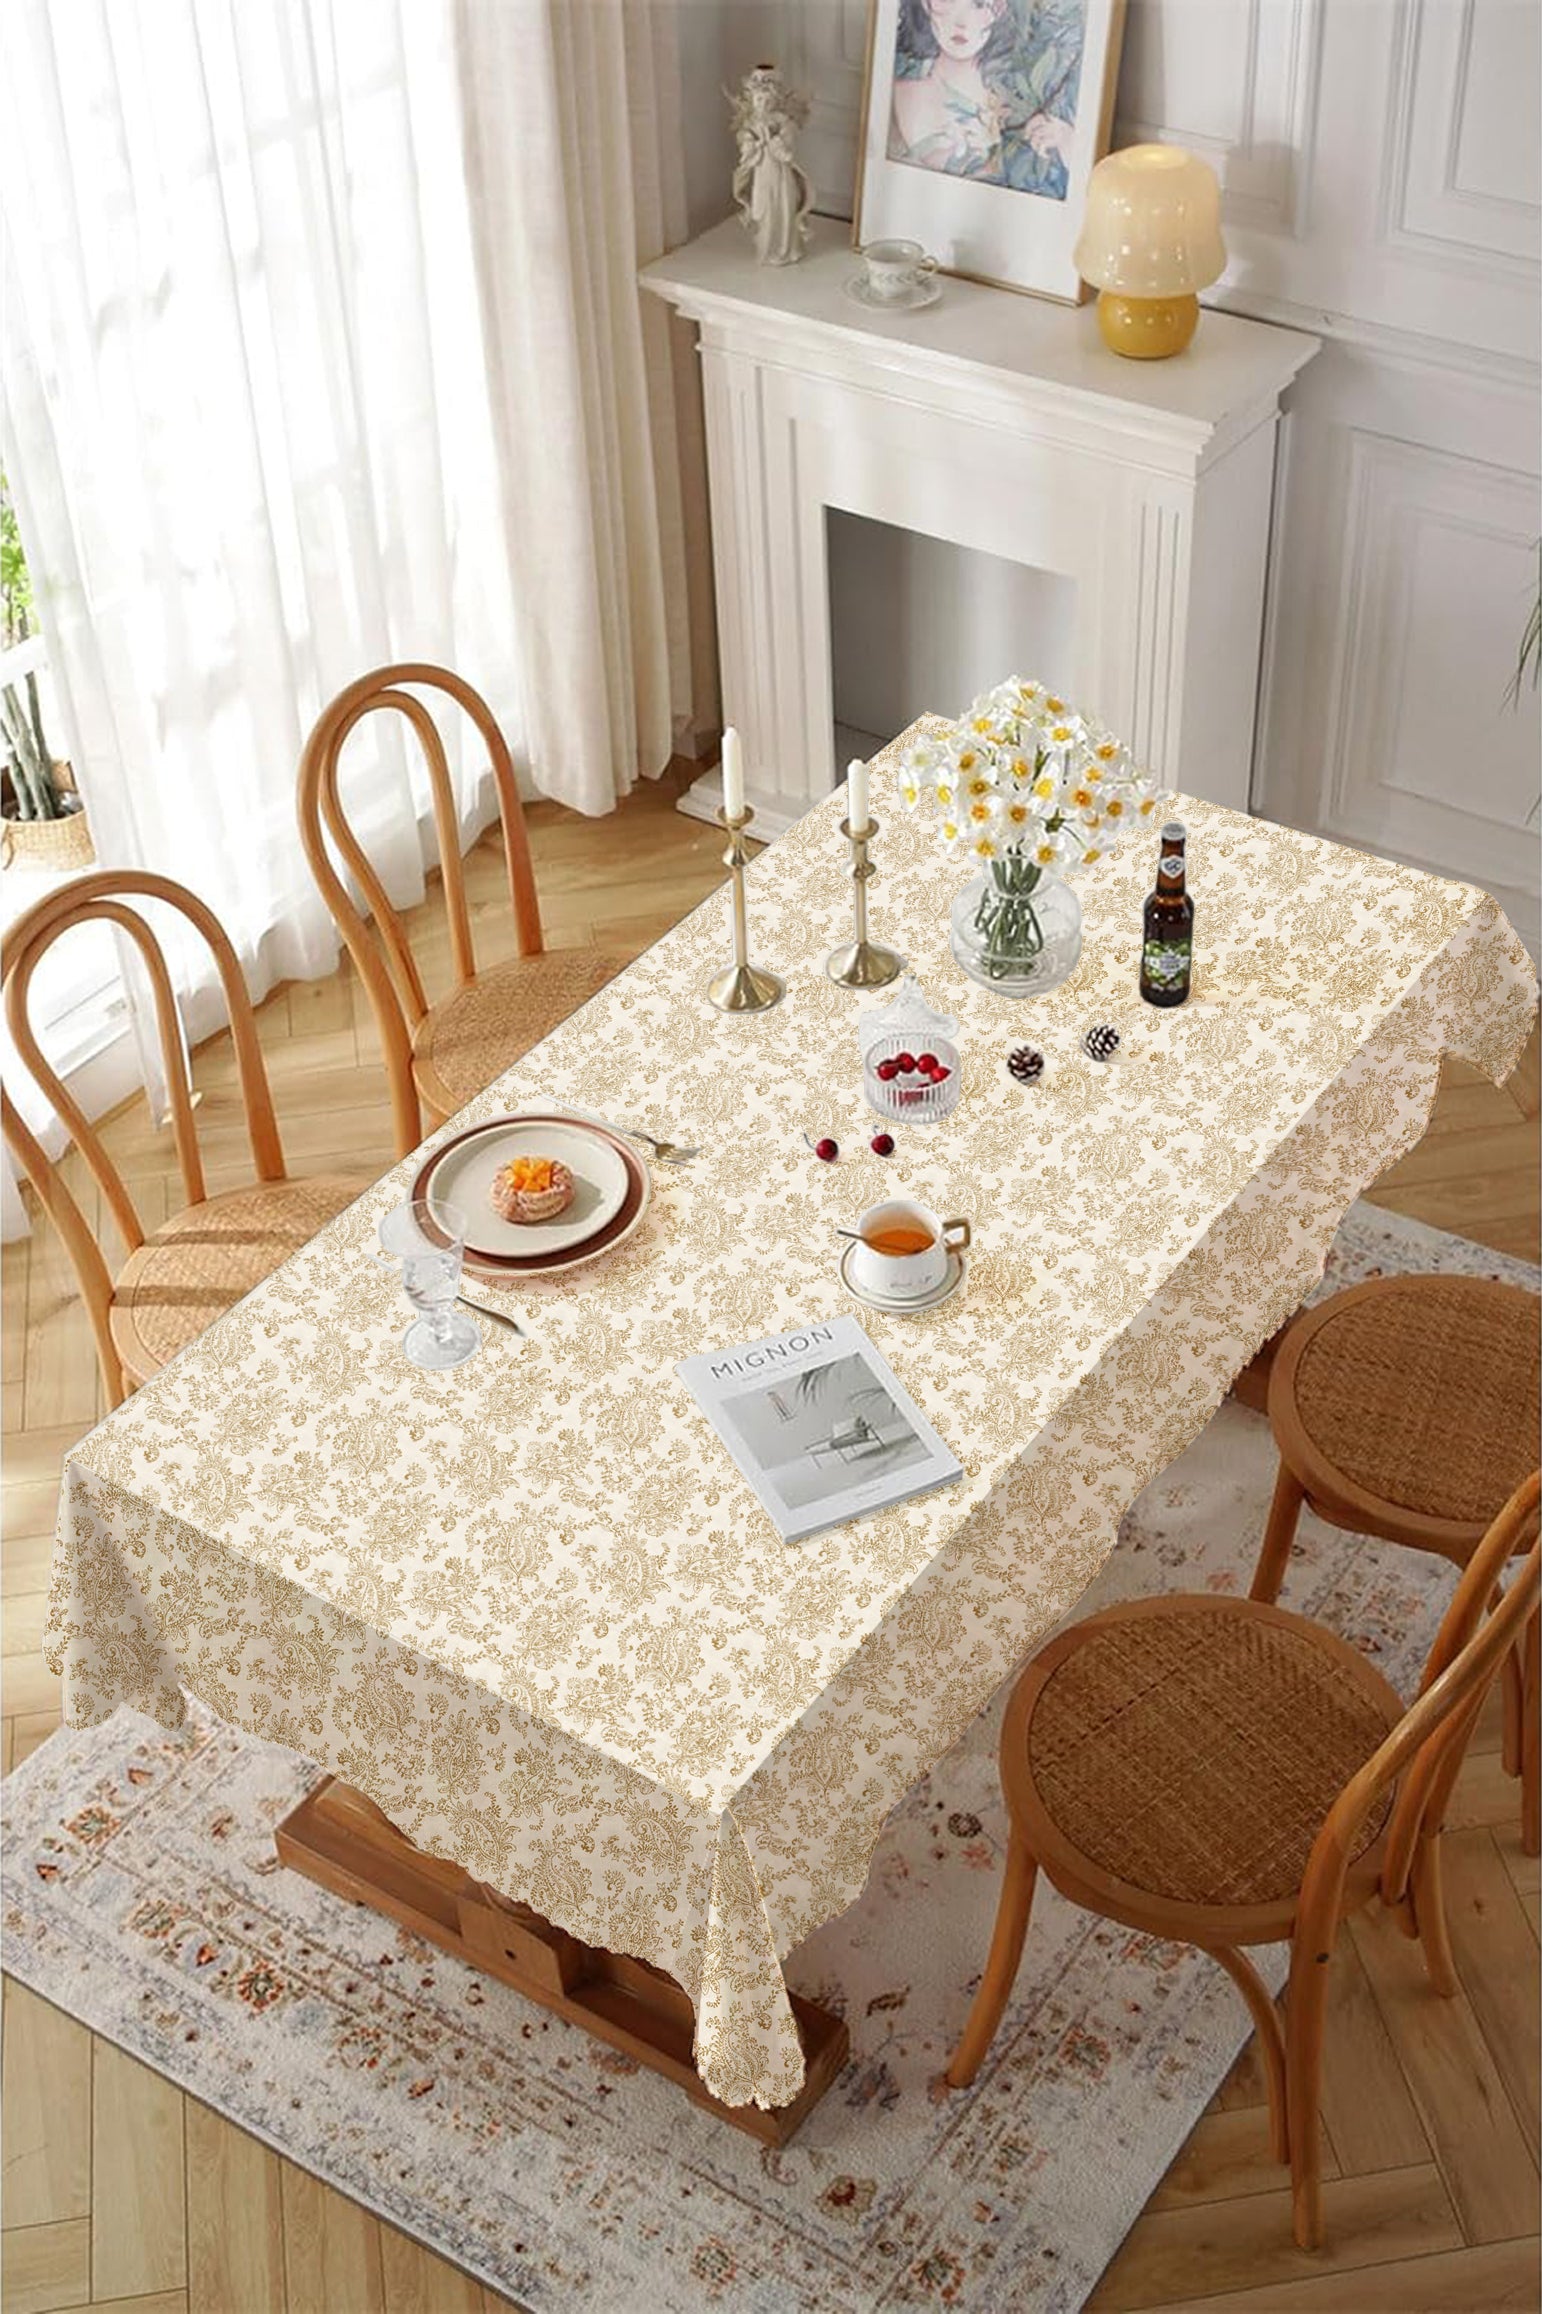 Jodhpur Flowers 6 Seater Table Cloth White And Camel